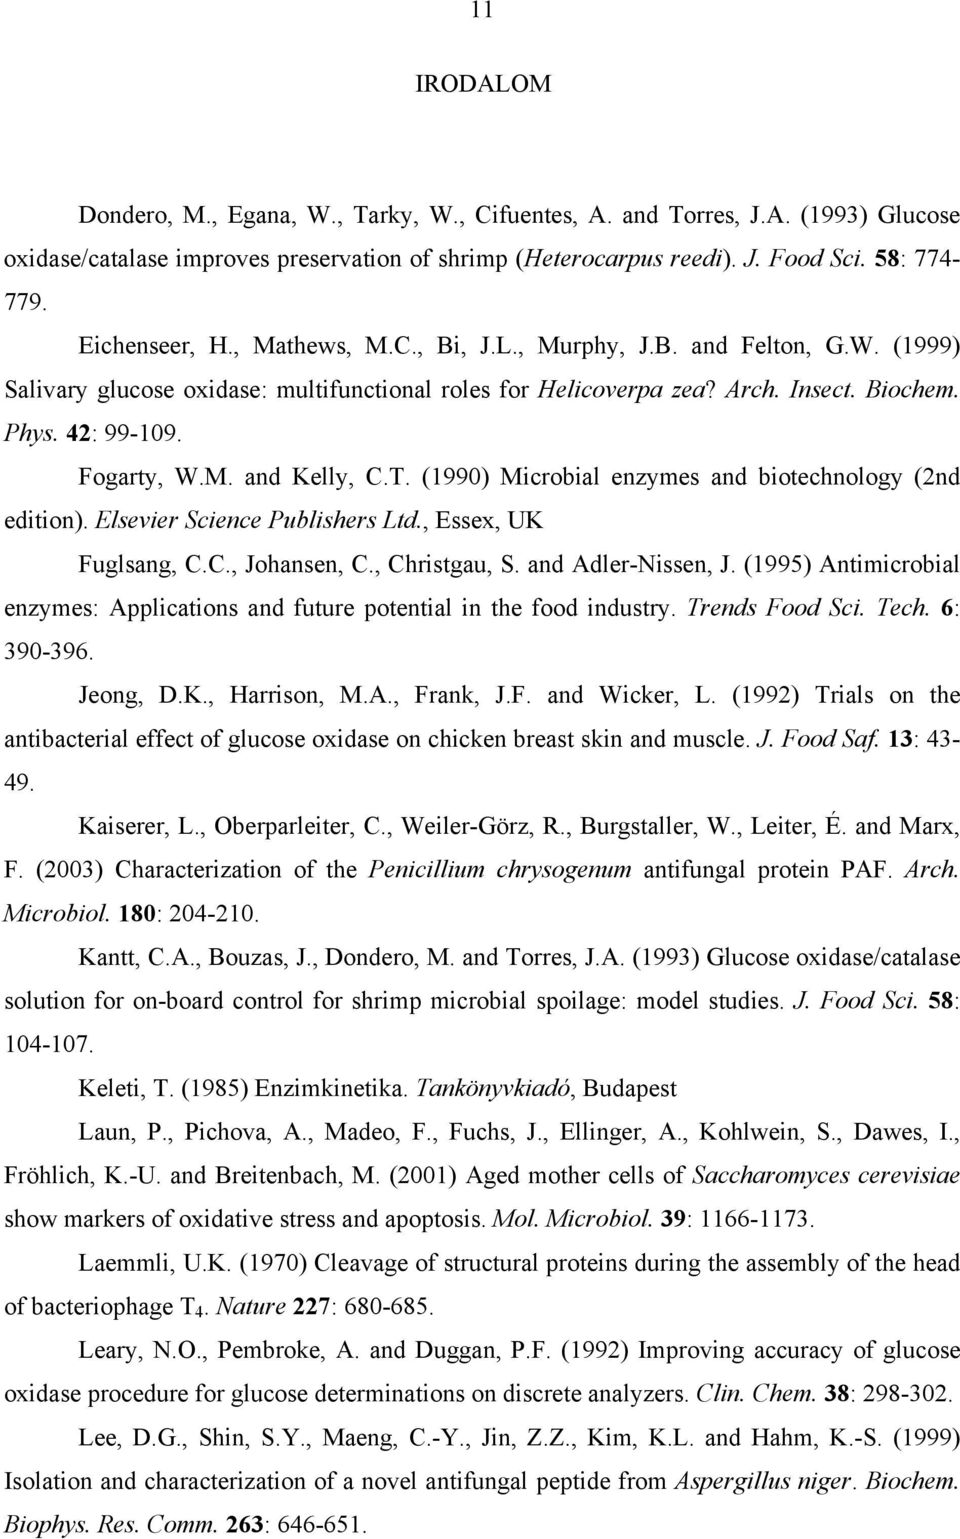 M. and Kelly, C.T. (1990) Microbial enzymes and biotechnology (2nd edition). Elsevier Science Publishers Ltd., Essex, UK Fuglsang, C.C., Johansen, C., Christgau, S. and Adler-Nissen, J.